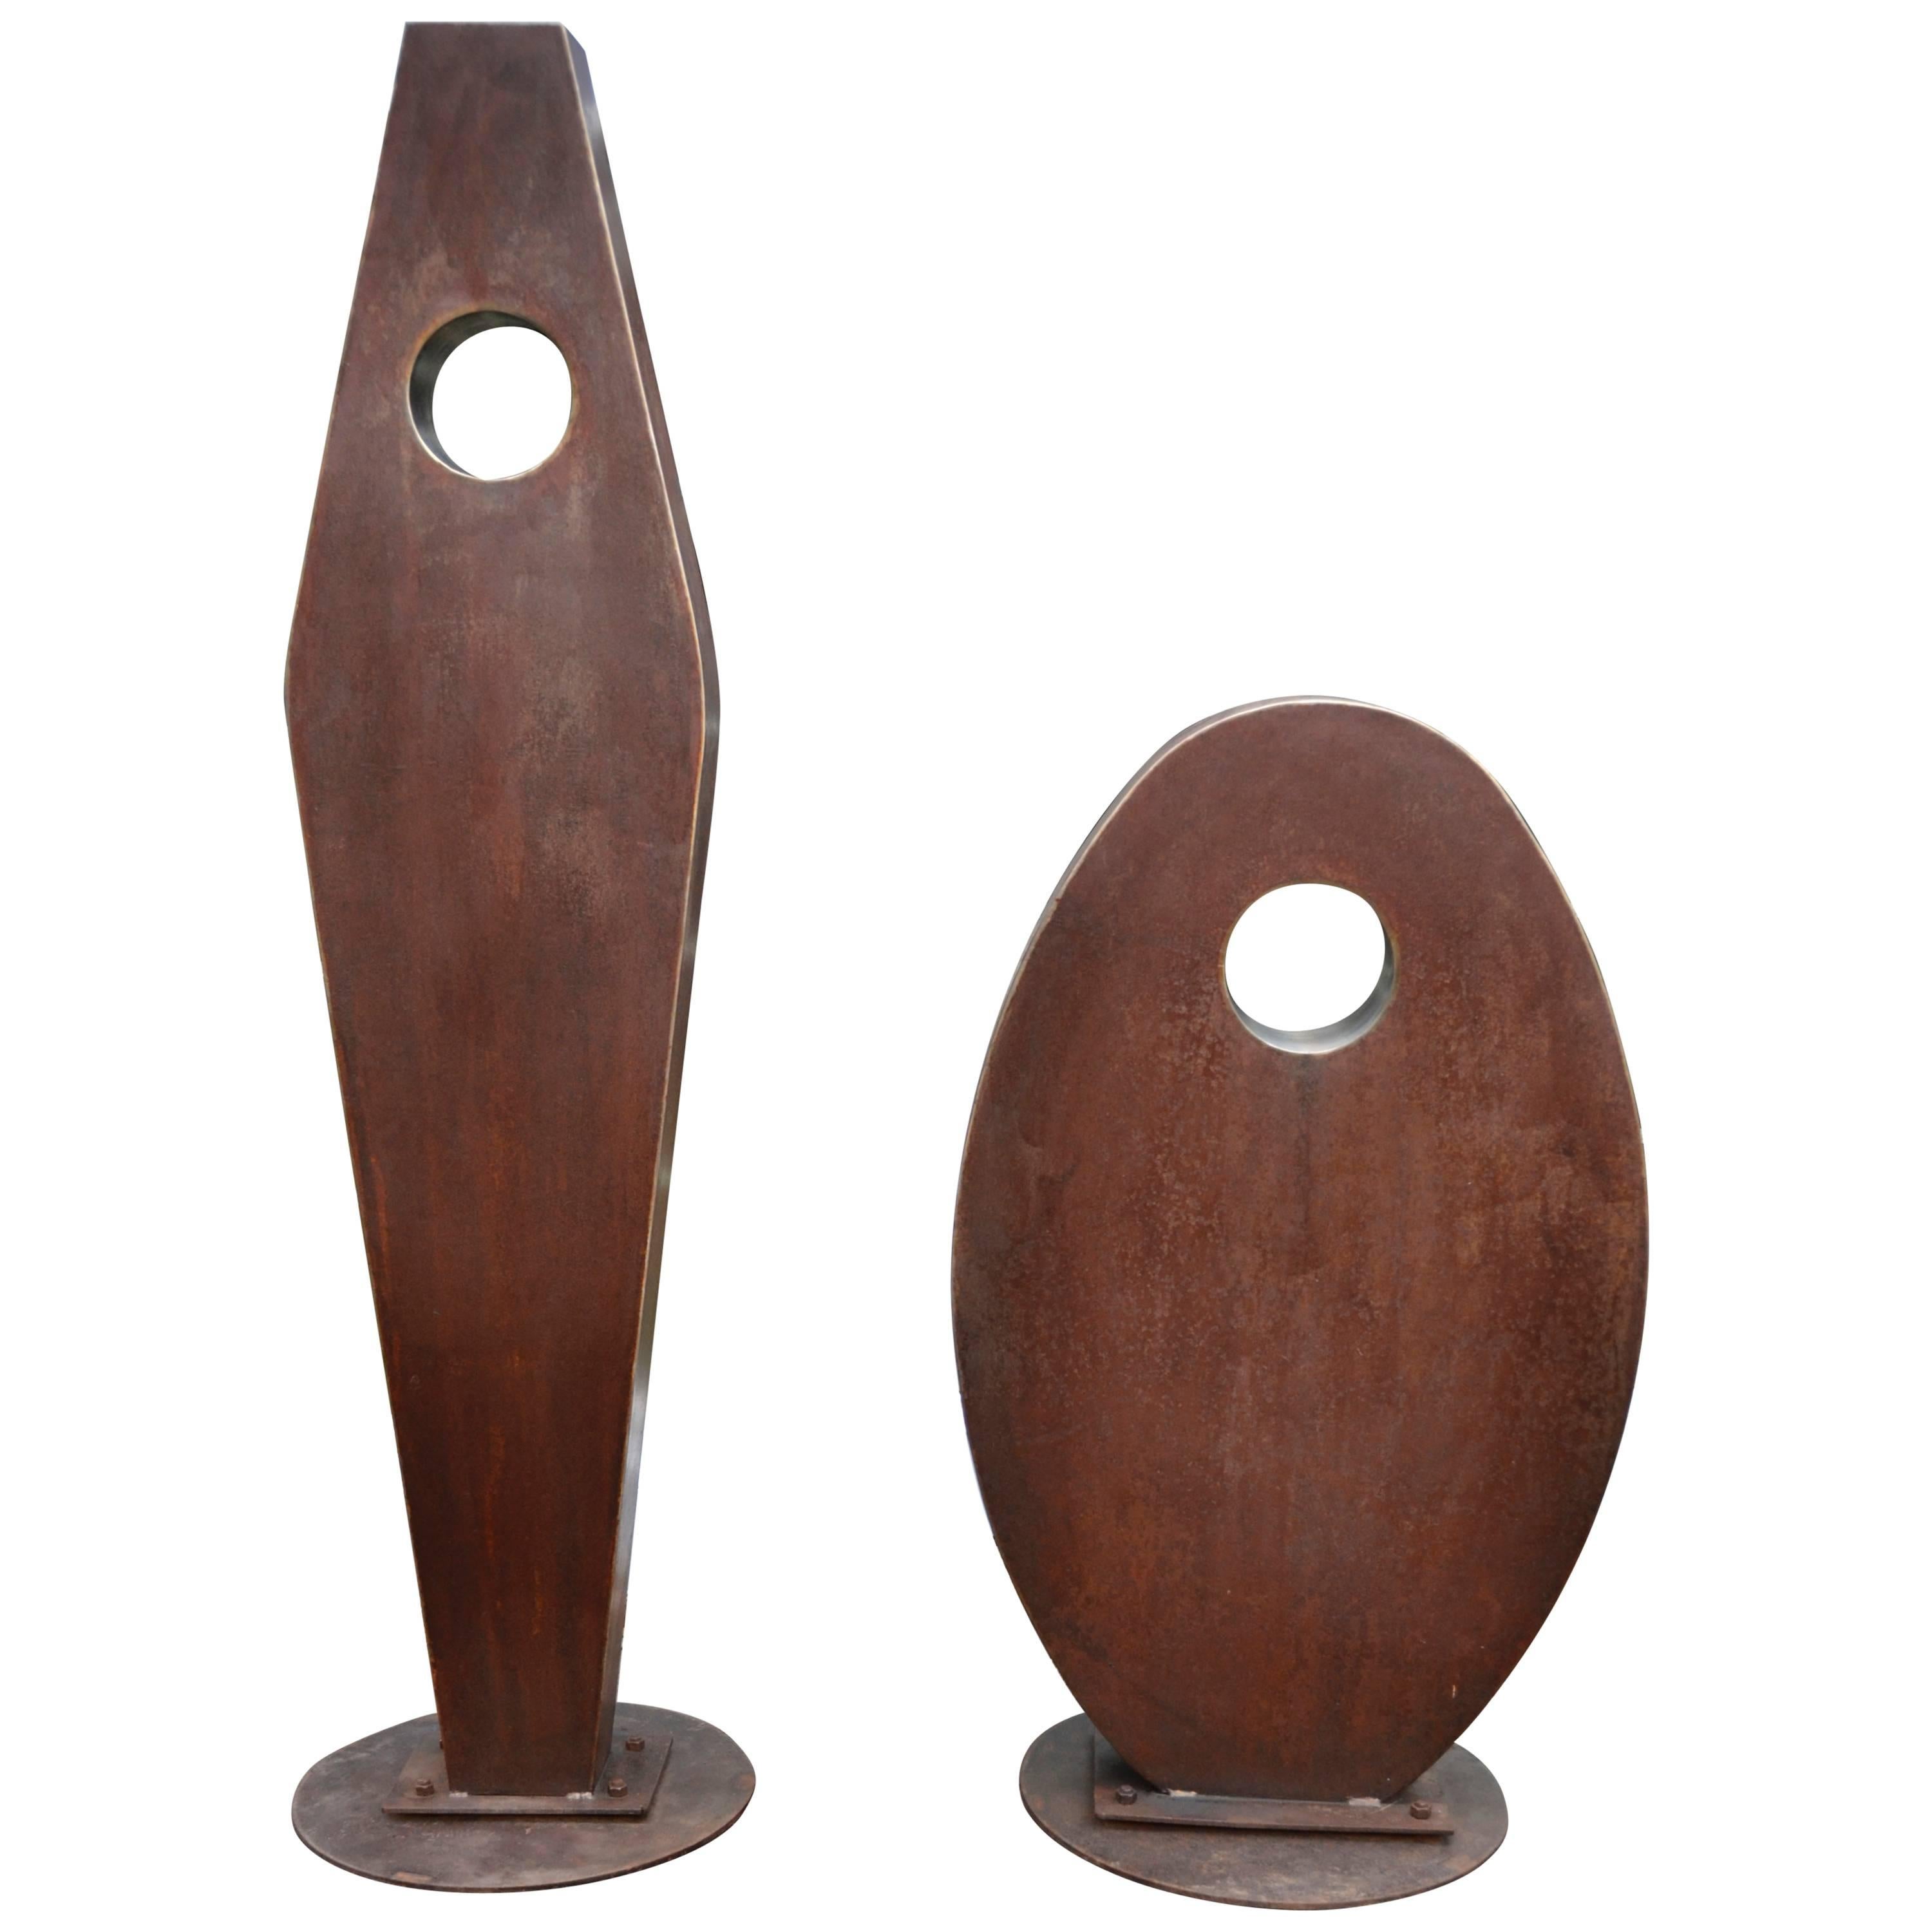 Pair of Corten Steel Sculpture by Jim Harvey Titled "The Odd Couple, circa 1970